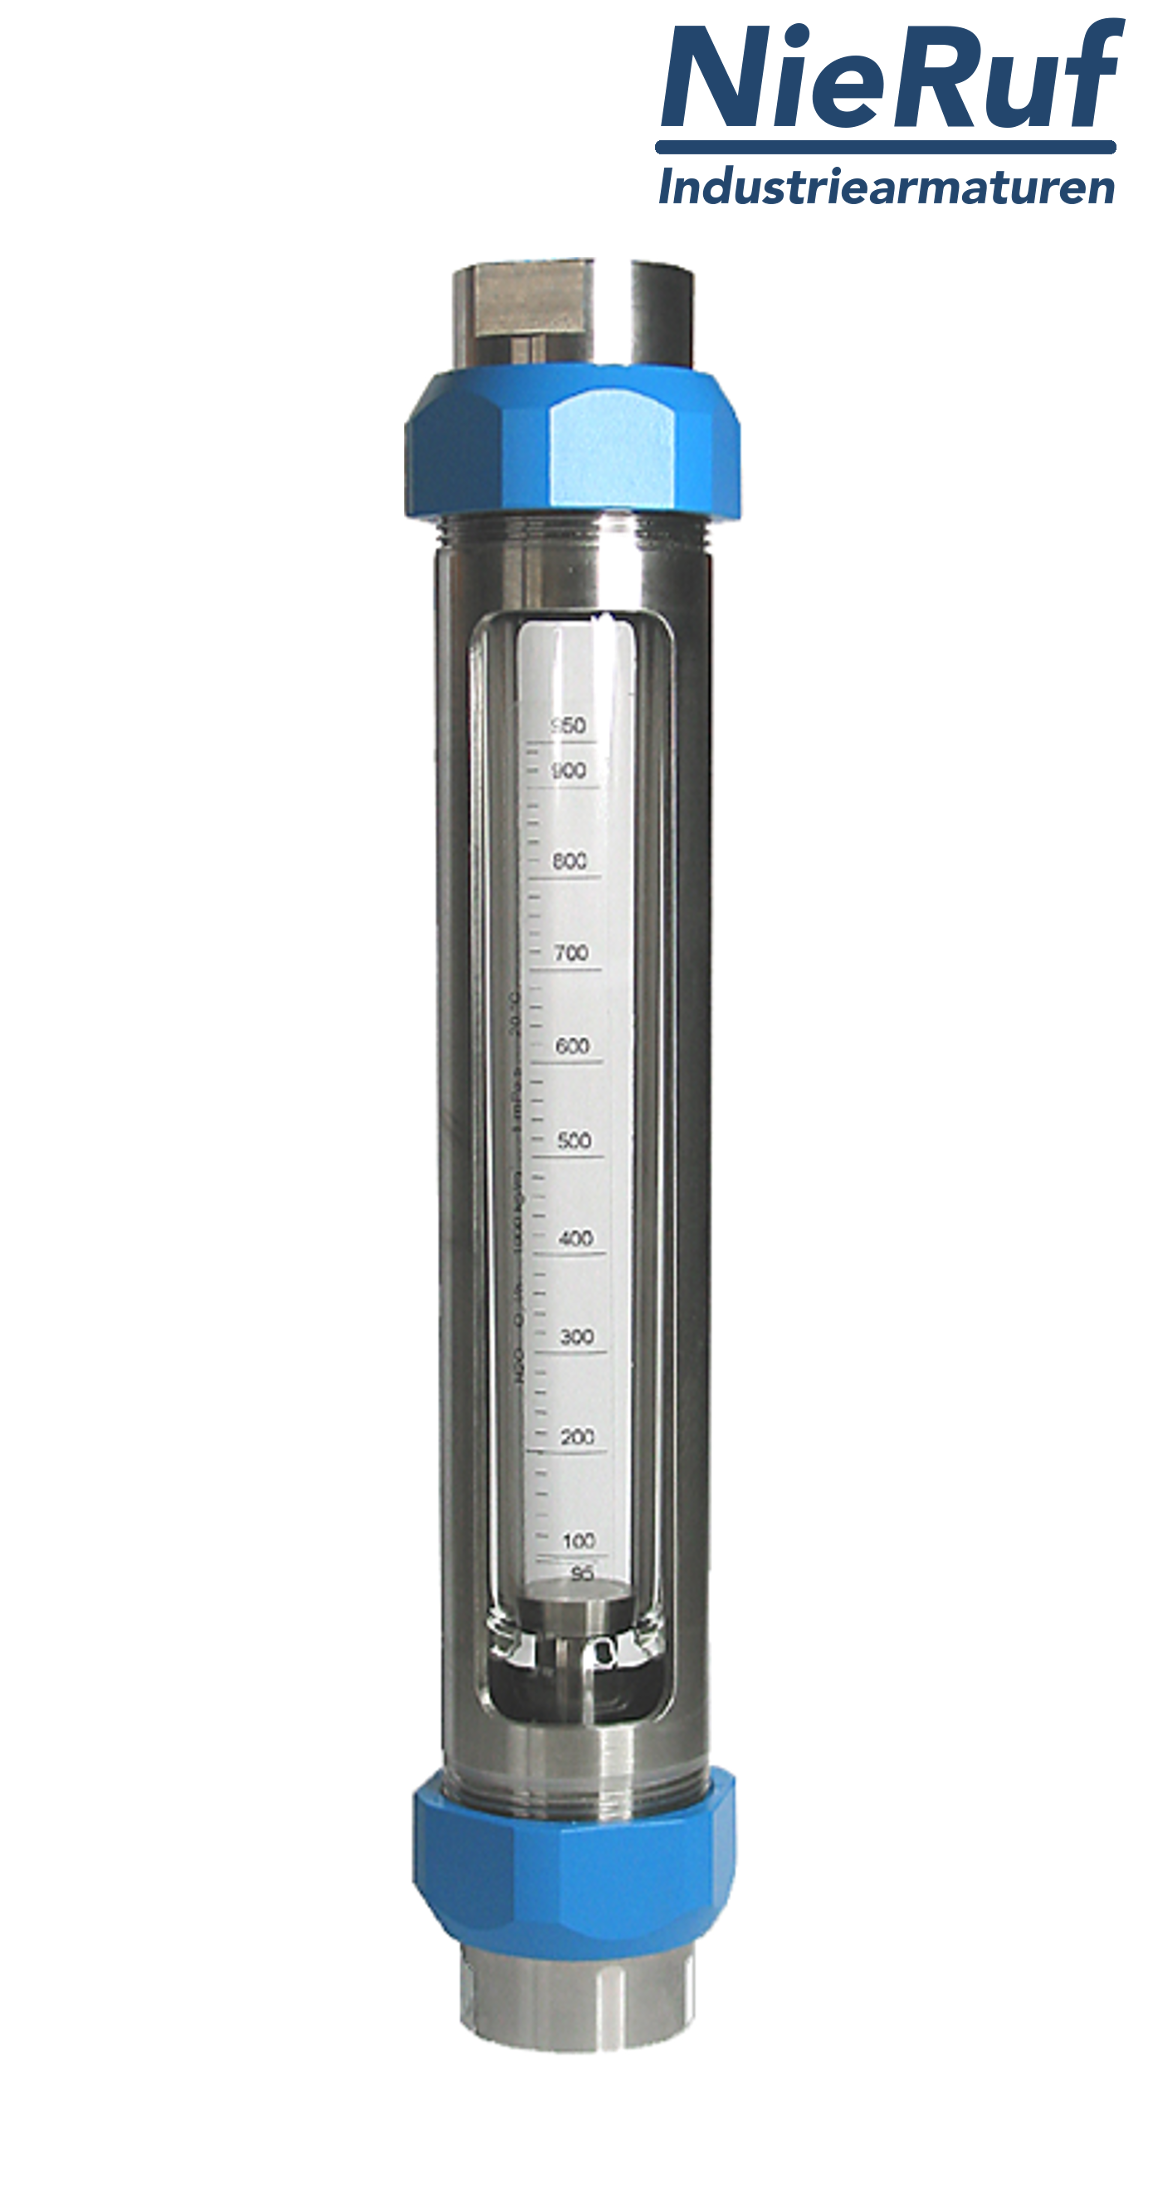 Variable area flowmeter stainless steel + borosilicate 2" inch 400.0 - 4000 l/h water FKM